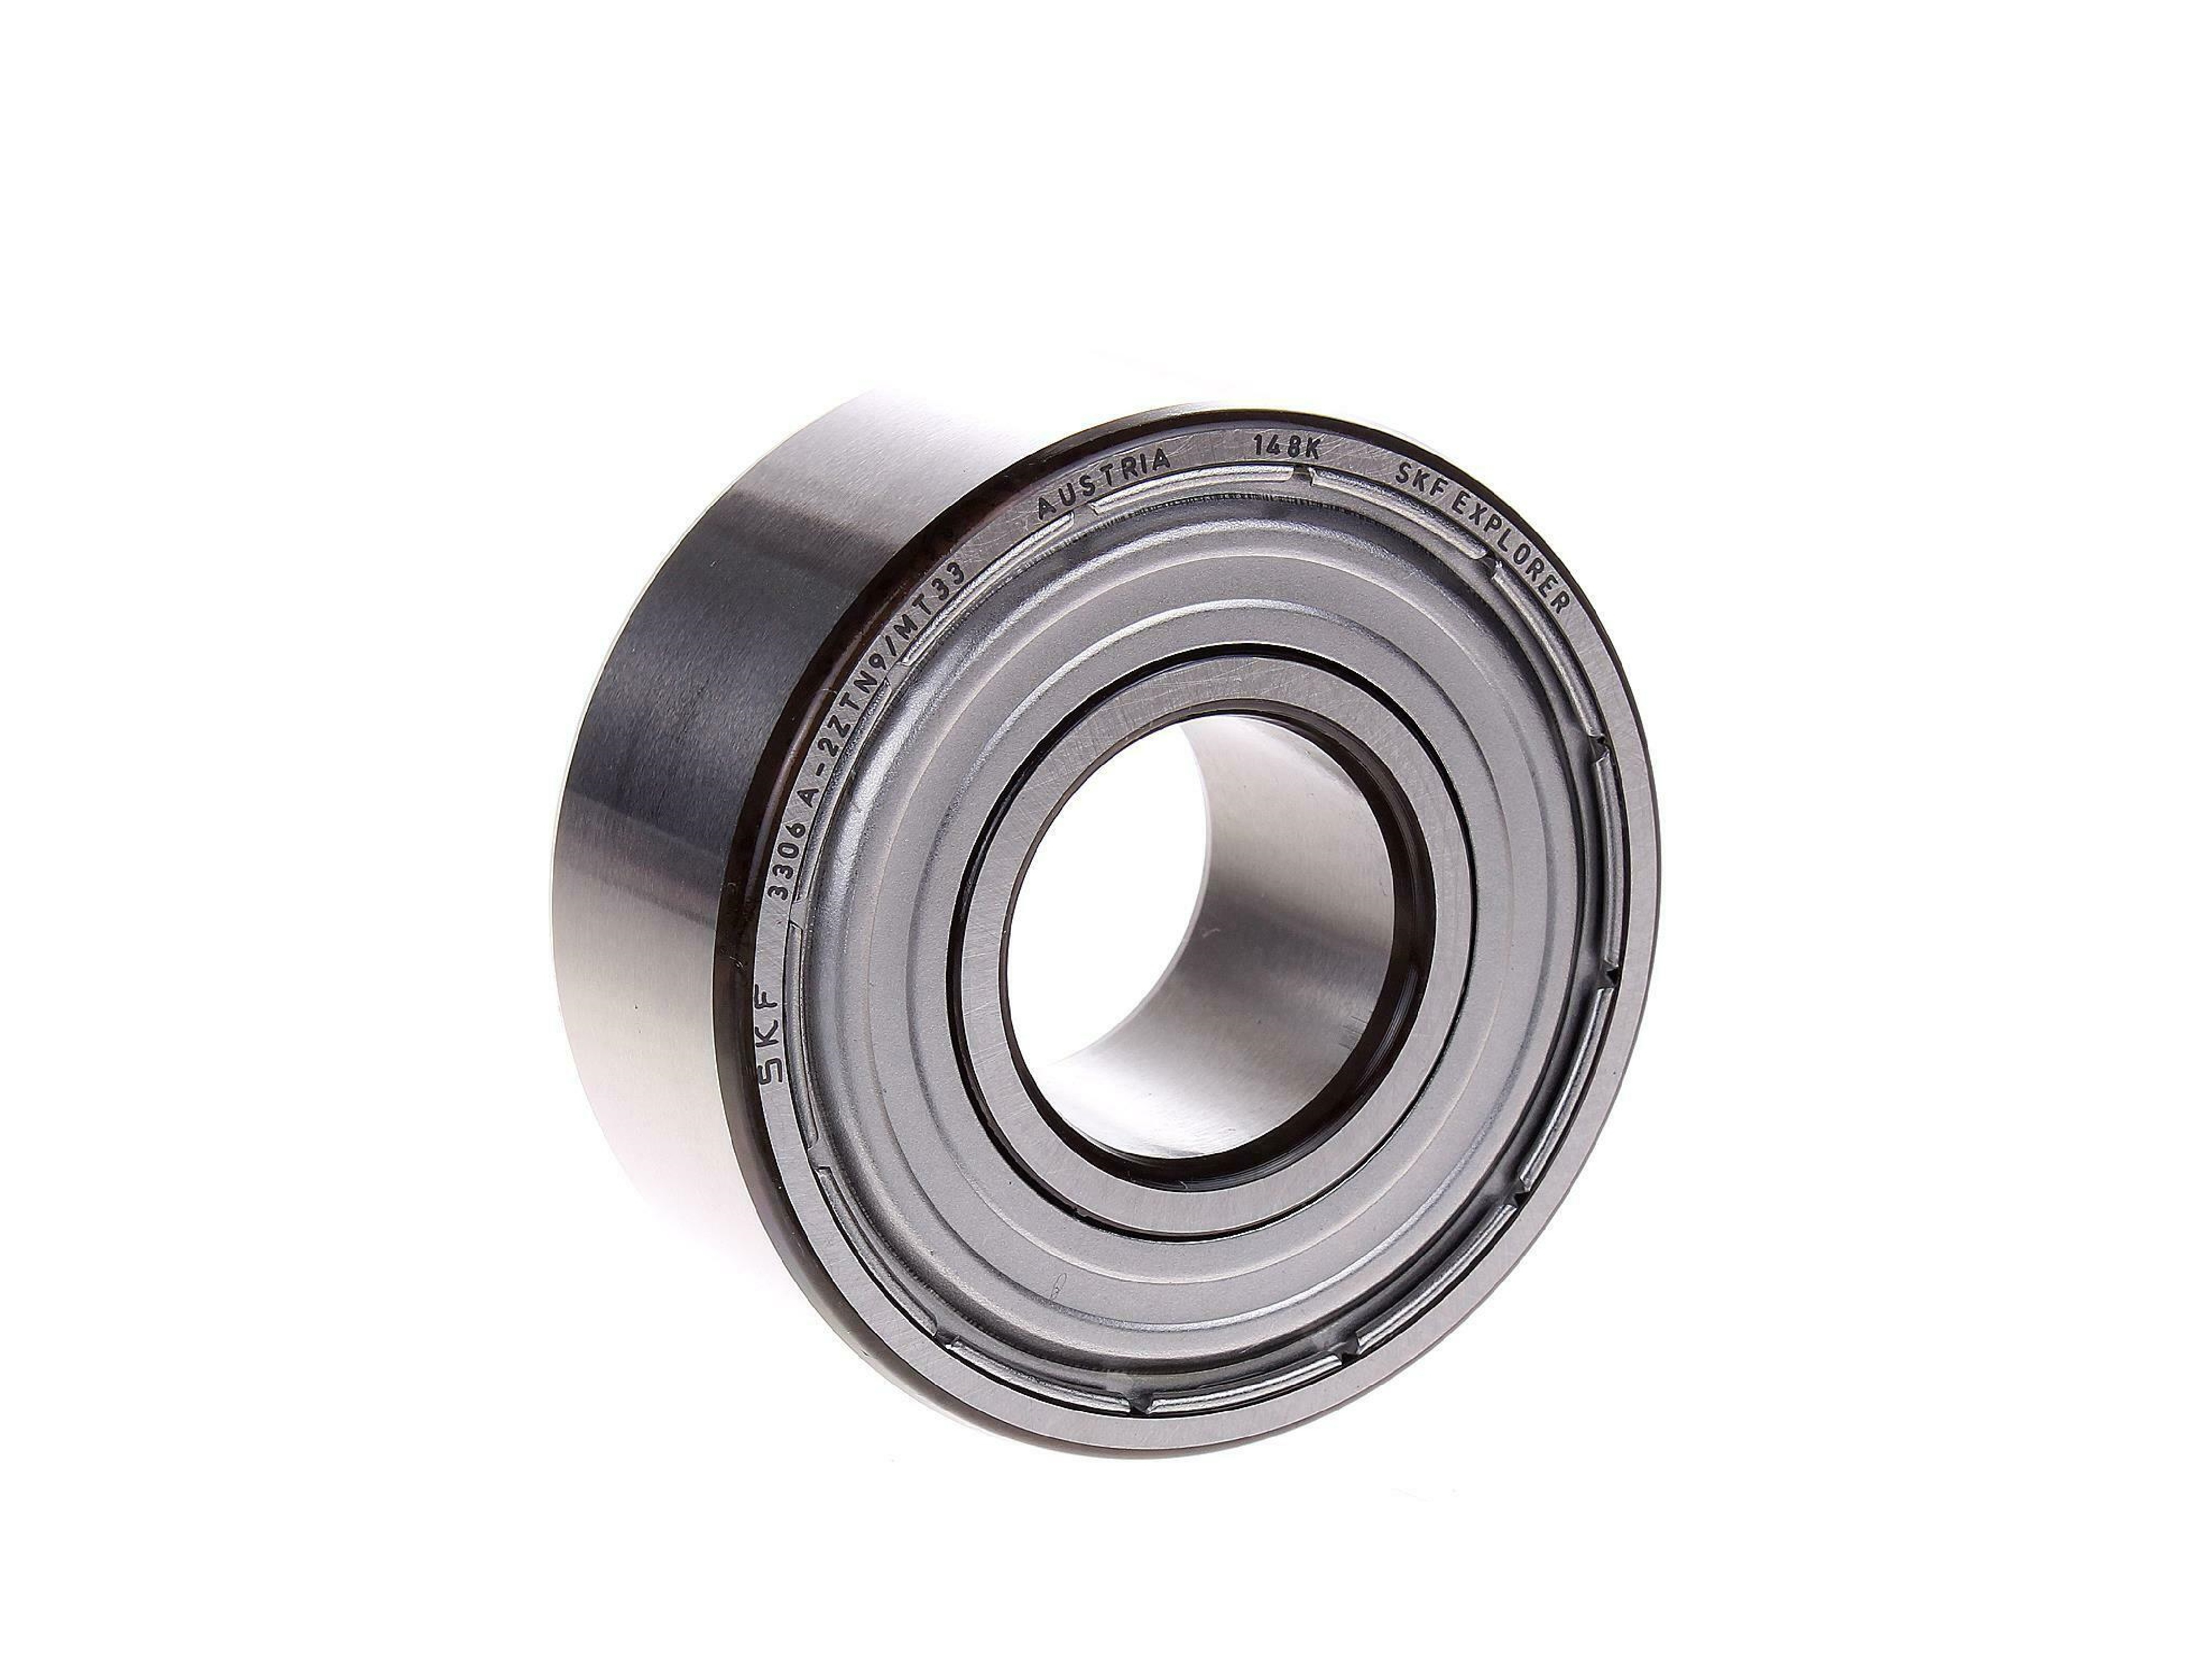 3211A-2Z/MT33 SKF Double Row Angular Contact Ball Bearing - Shielded 55mm x 100mm x 33.3mm